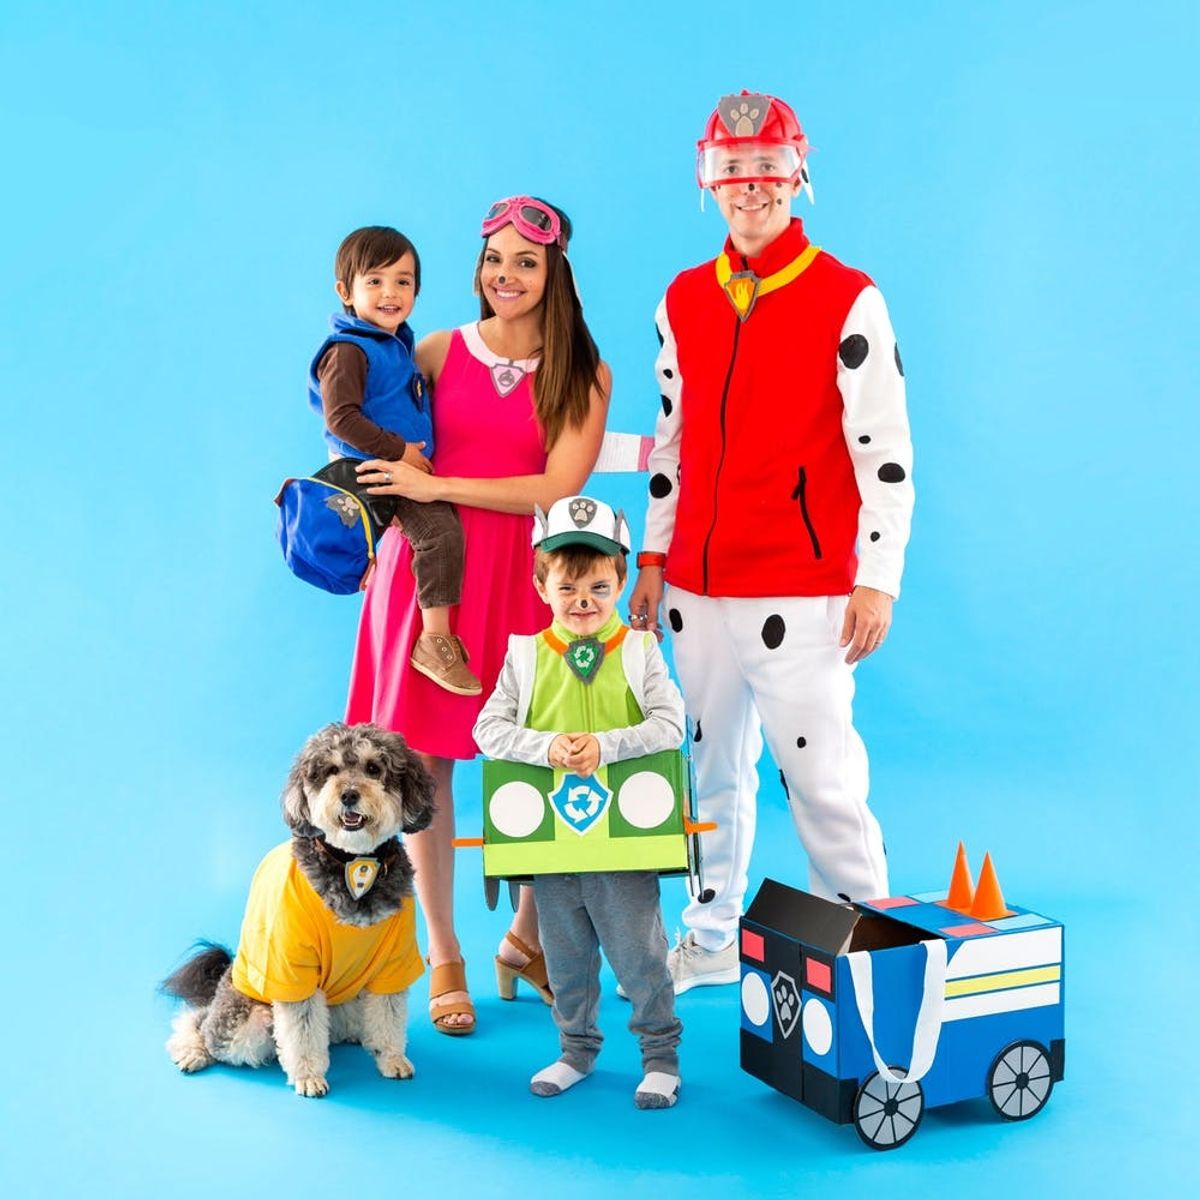 This ‘PAW Patrol’ Family Halloween Costume Is So Doggone Cute